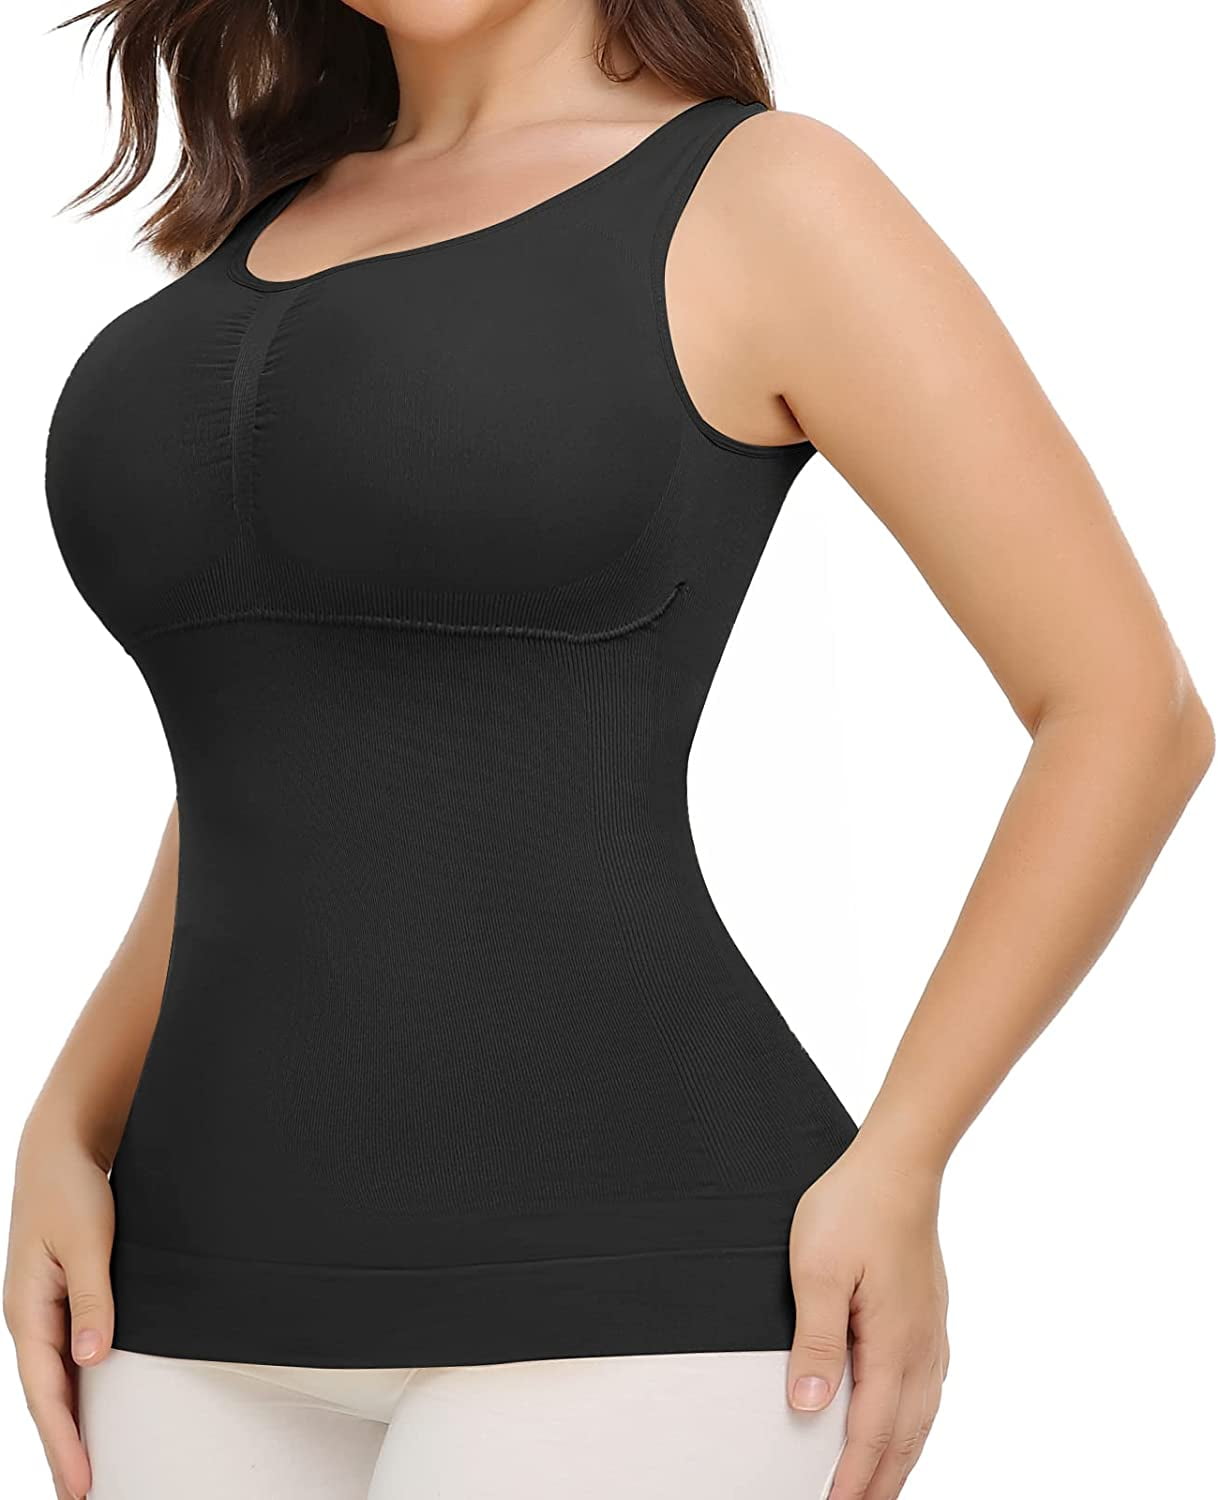 Fitvalen Women Shaper Cami With Built In Bra Shapewear Tank Top Tummy Control Camisole Slimming